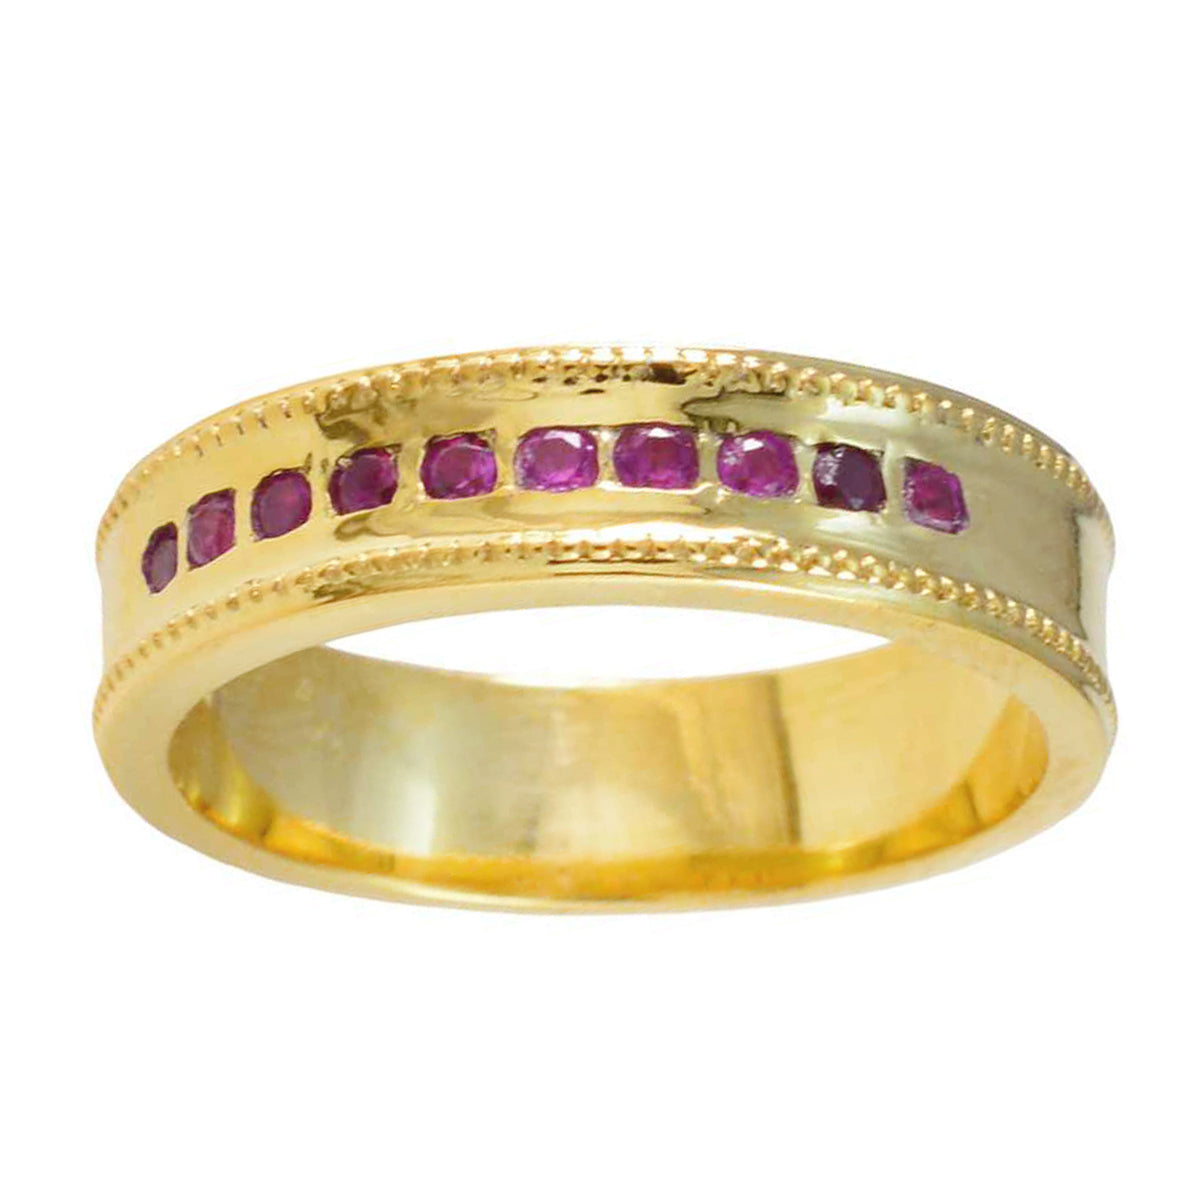 Riyo Adorable Silver Ring With Yellow Gold Plating Ruby CZ Stone Round Shape Bezel Setting Ring